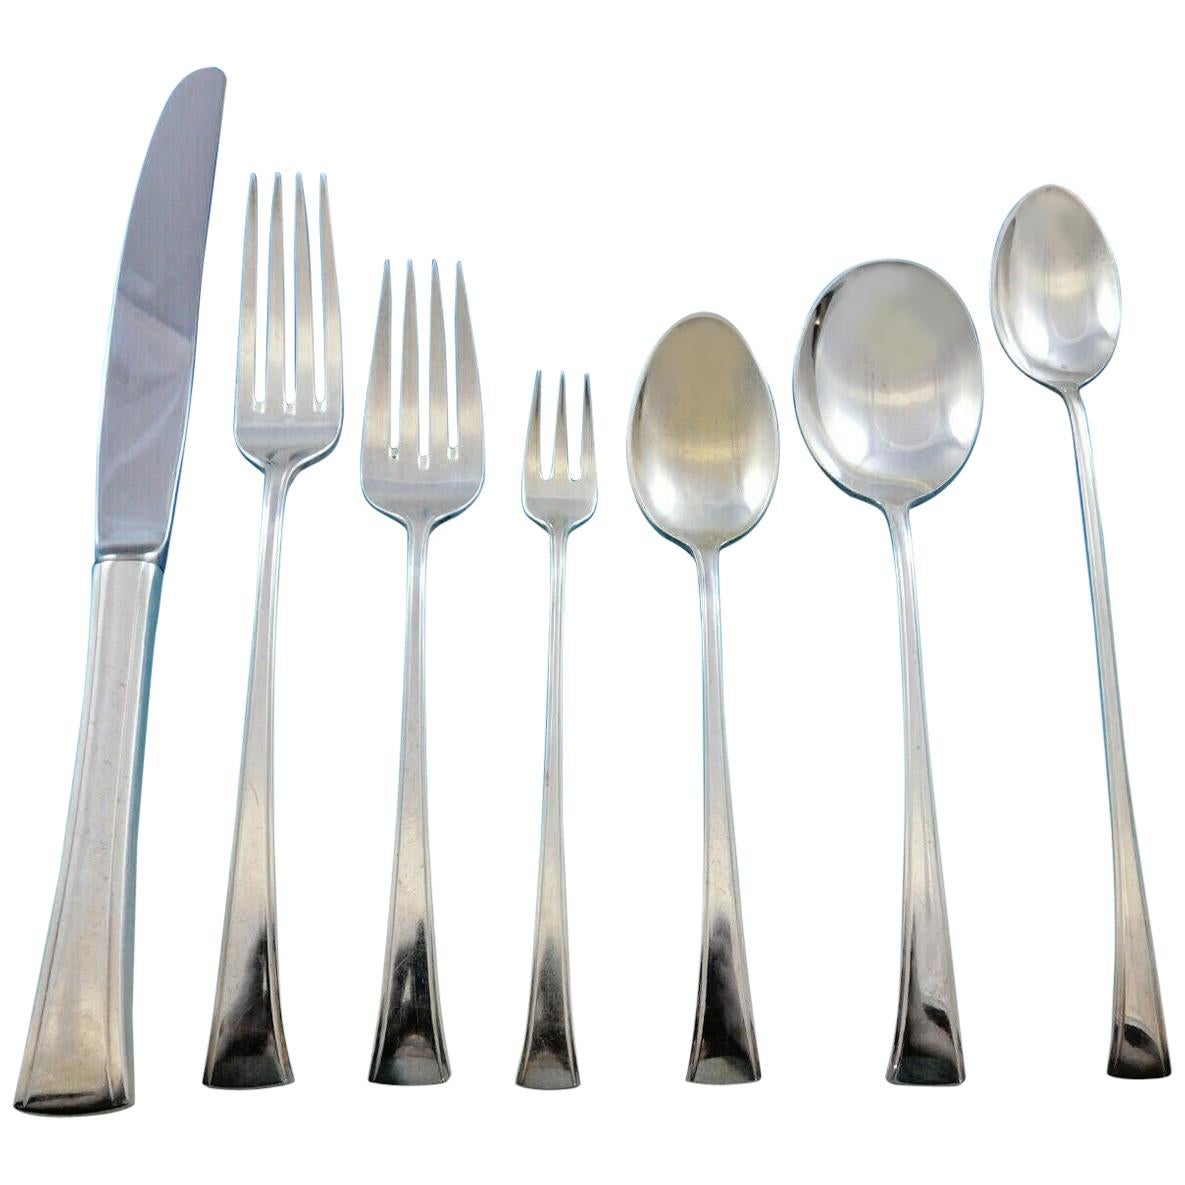 Tranquility by International Sterling Silver Flatware Set 8 Service 58 Pieces